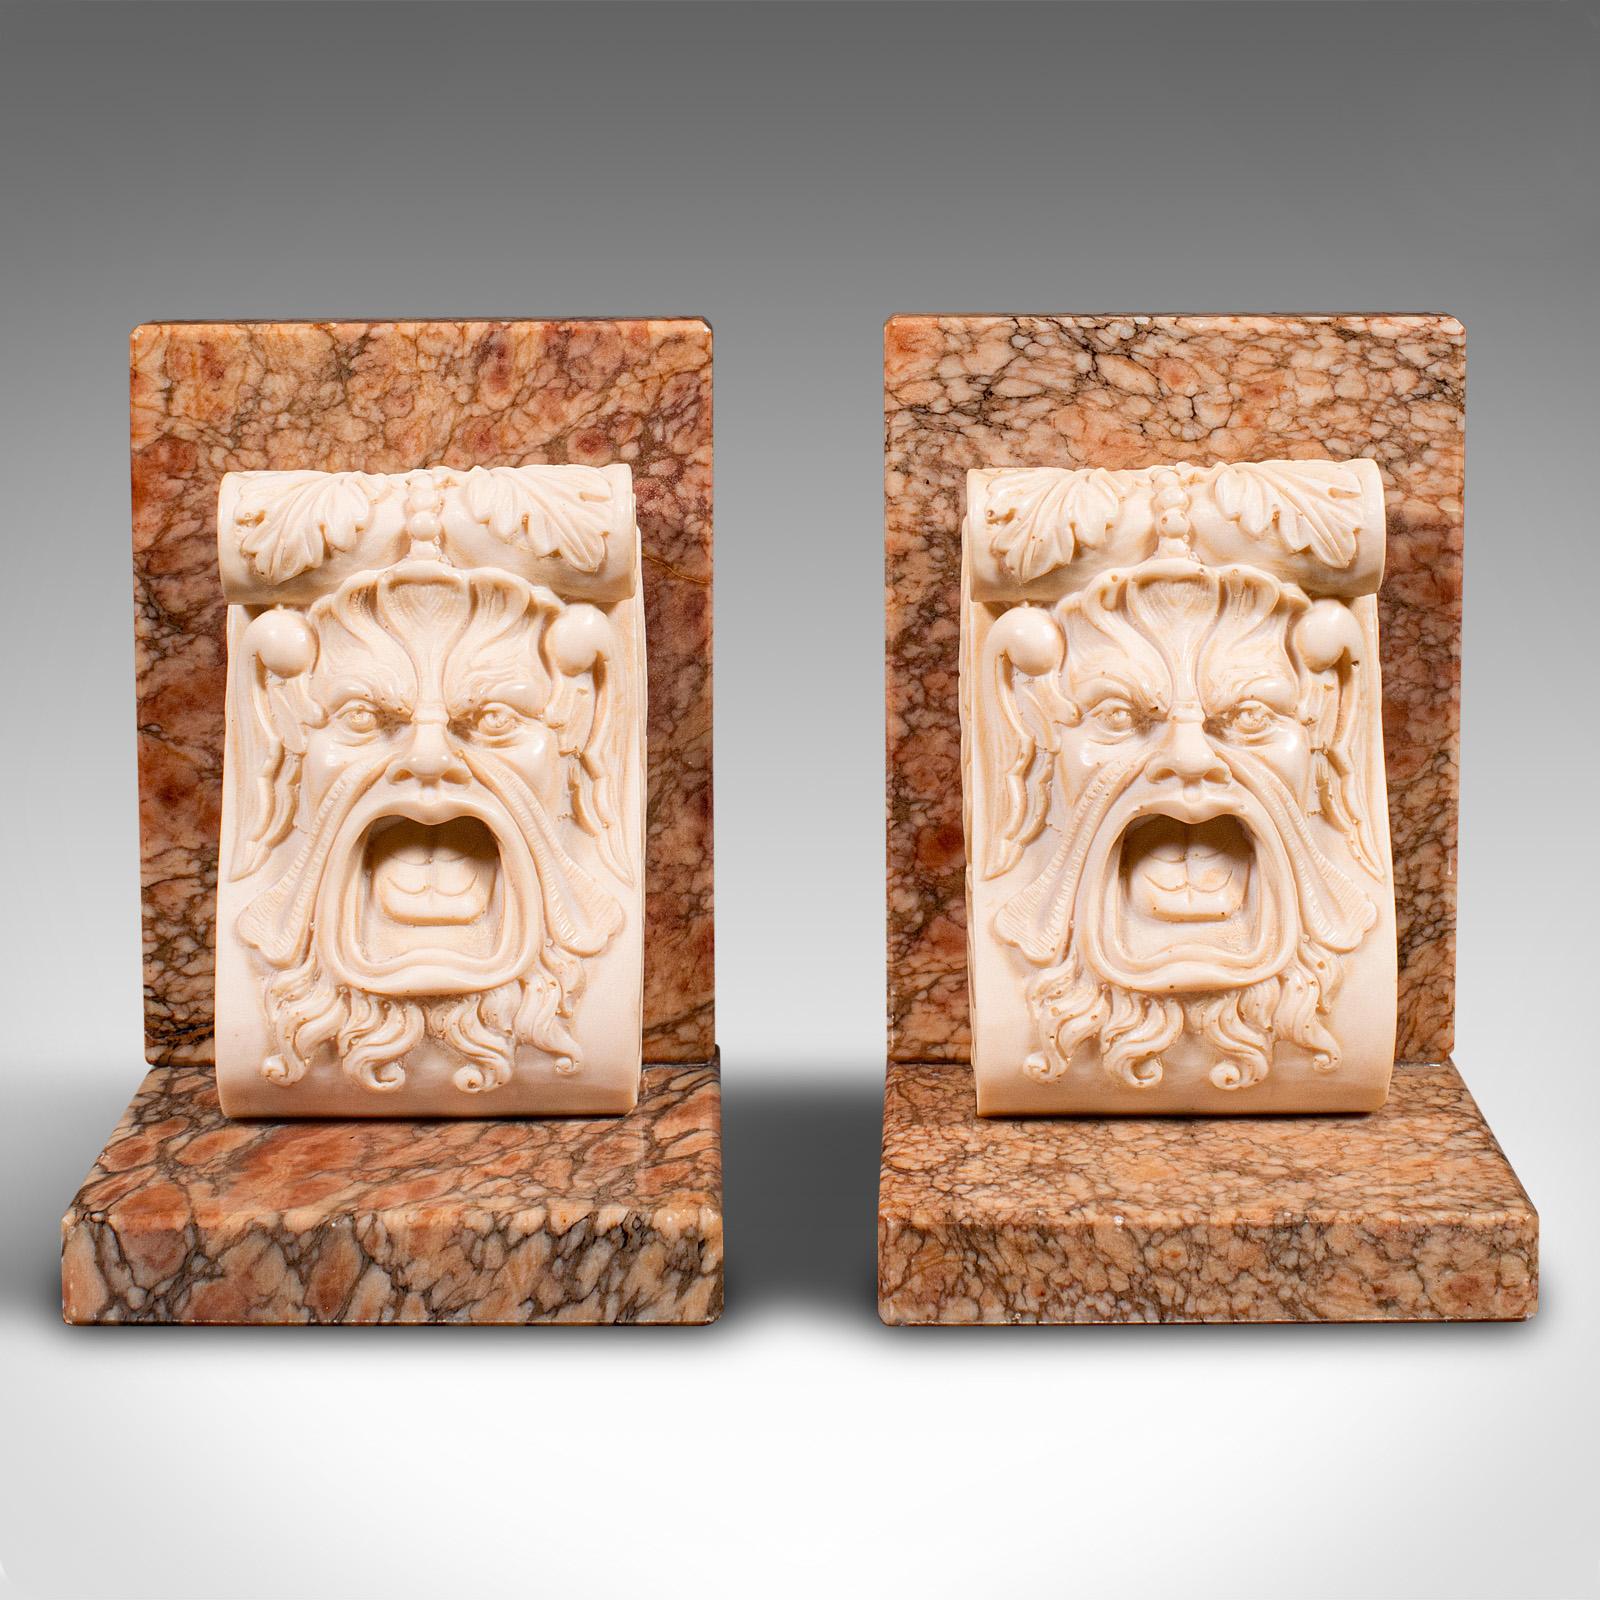 This is a pair of vintage decorative bookends. An Italian, marble book rest in classical taste, dating to the Art Deco period, circa 1940.

Fascinating decorative bookends with a striking appearance
Displaying a desirable aged patina and in very